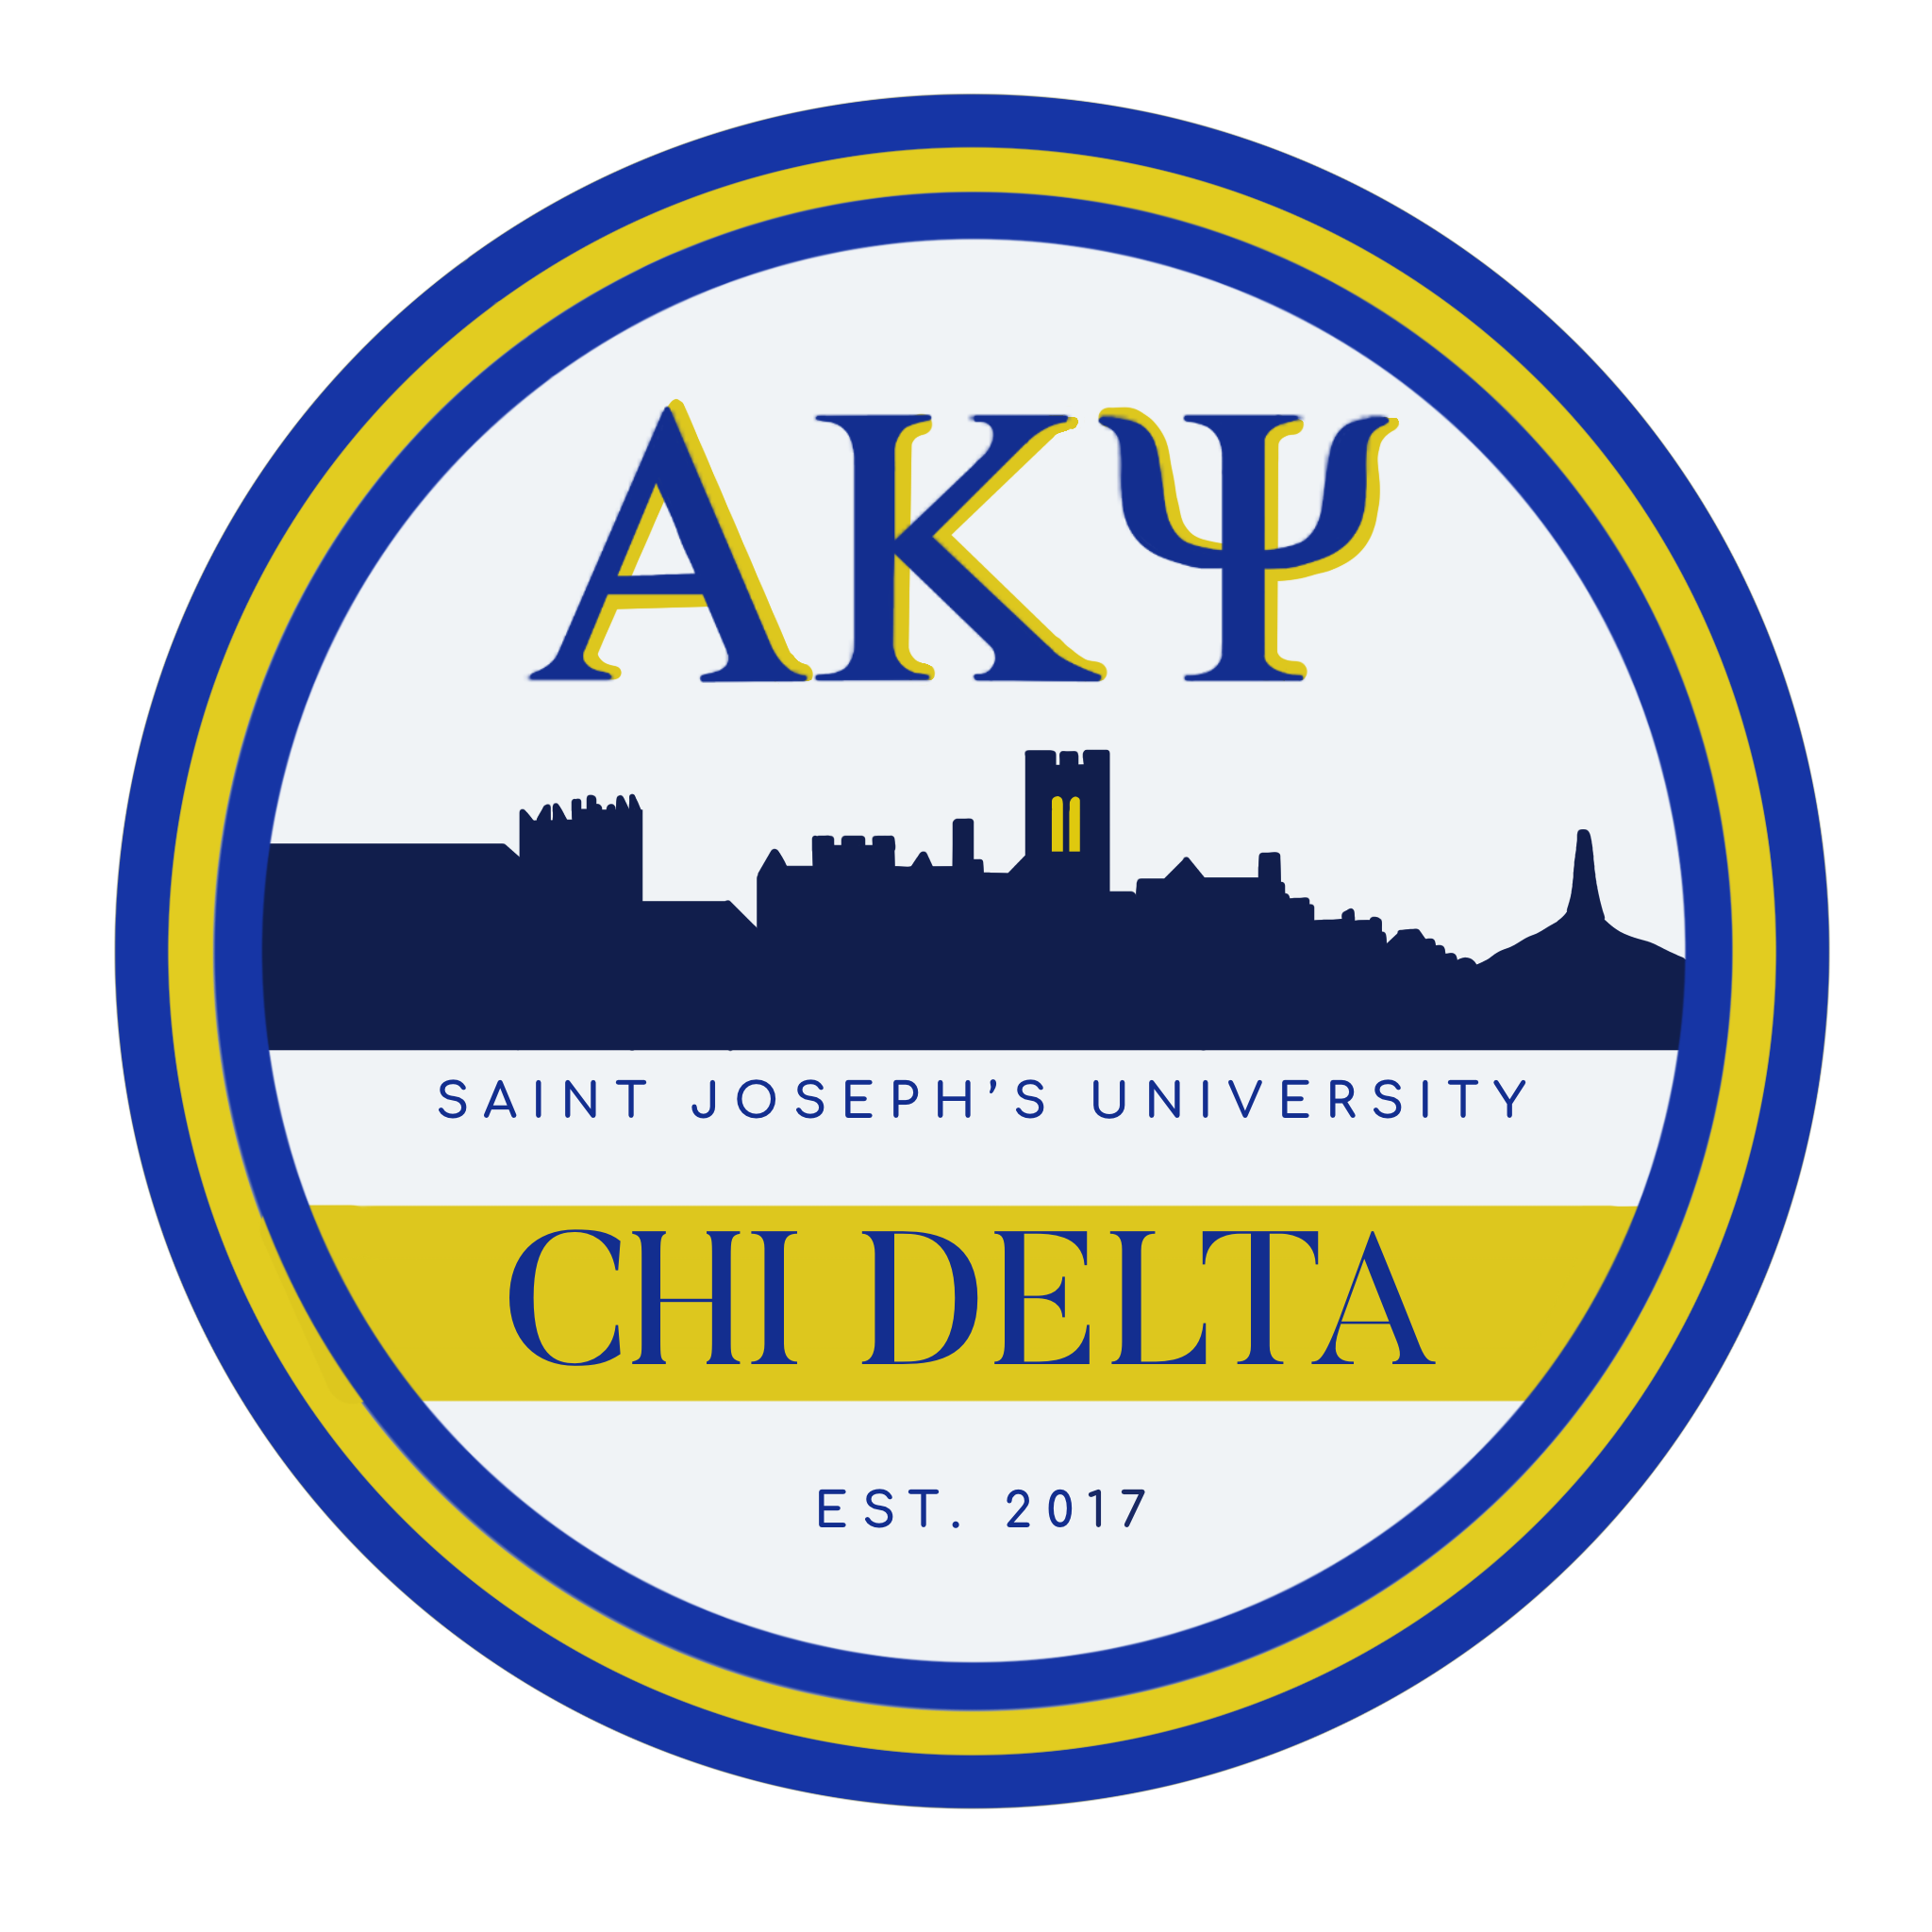 Logo created for Alpha Kappa Psi Chi Delta fraternity at SJU in white, blue and yellow